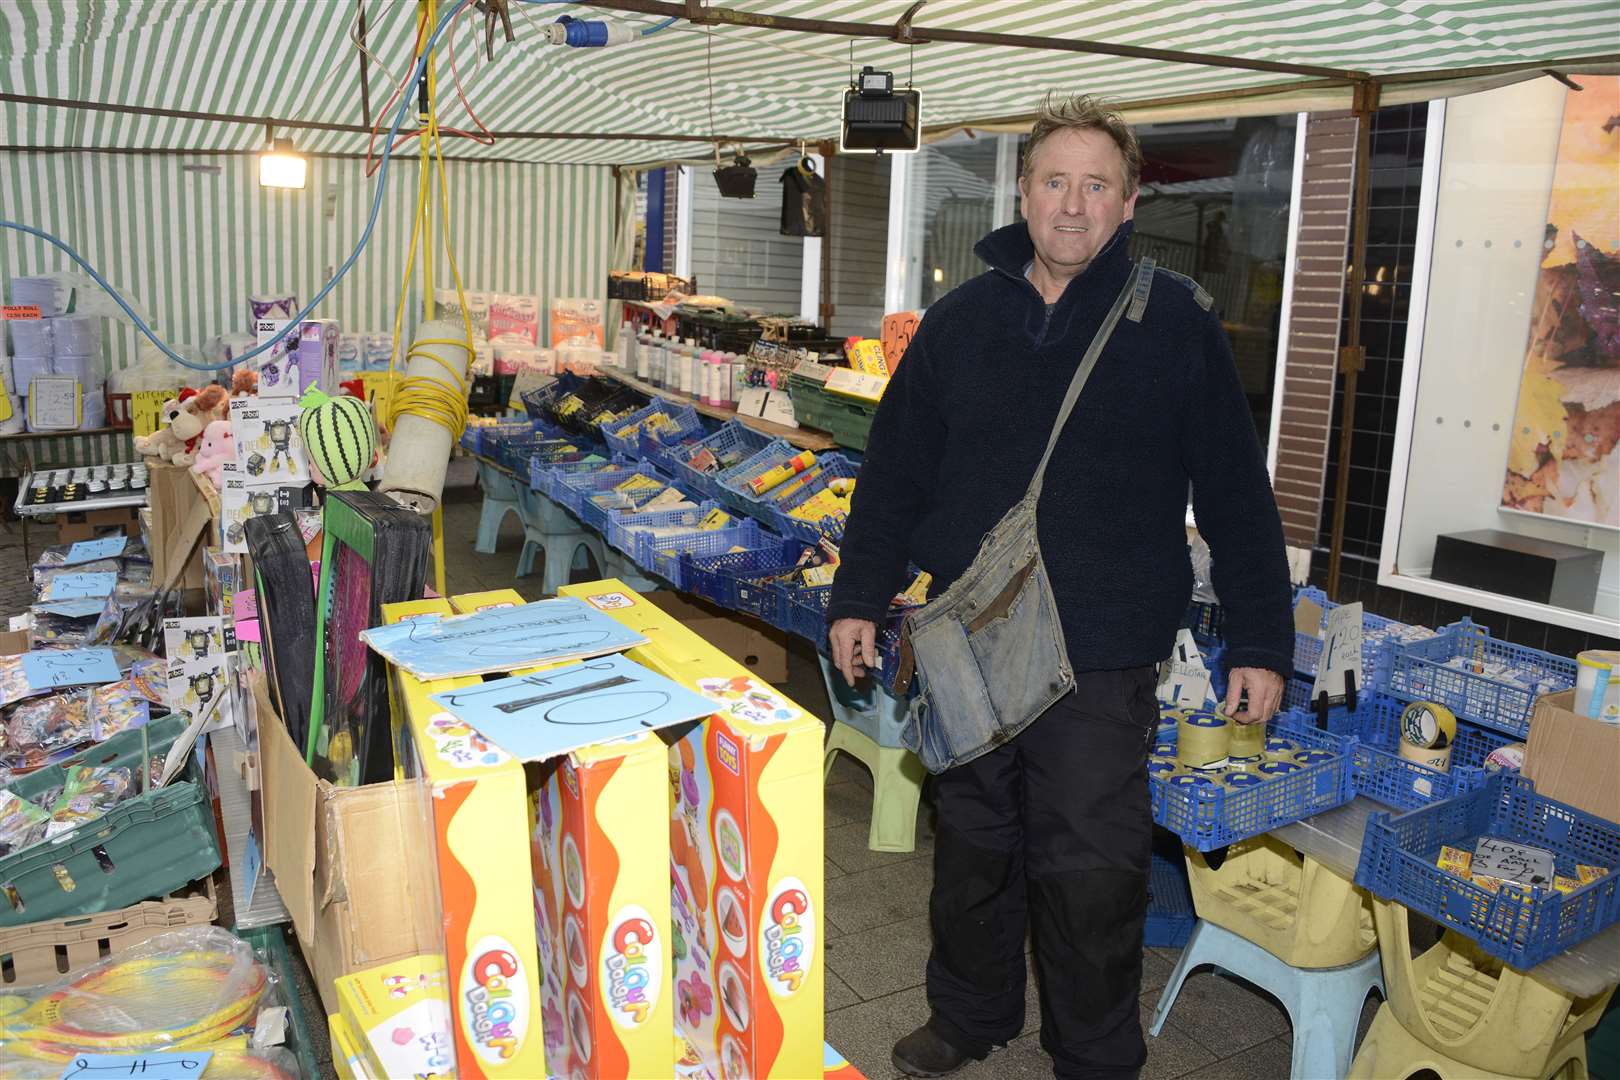 Folkestone market will return to full capacity this week. Picture: Paul Amos